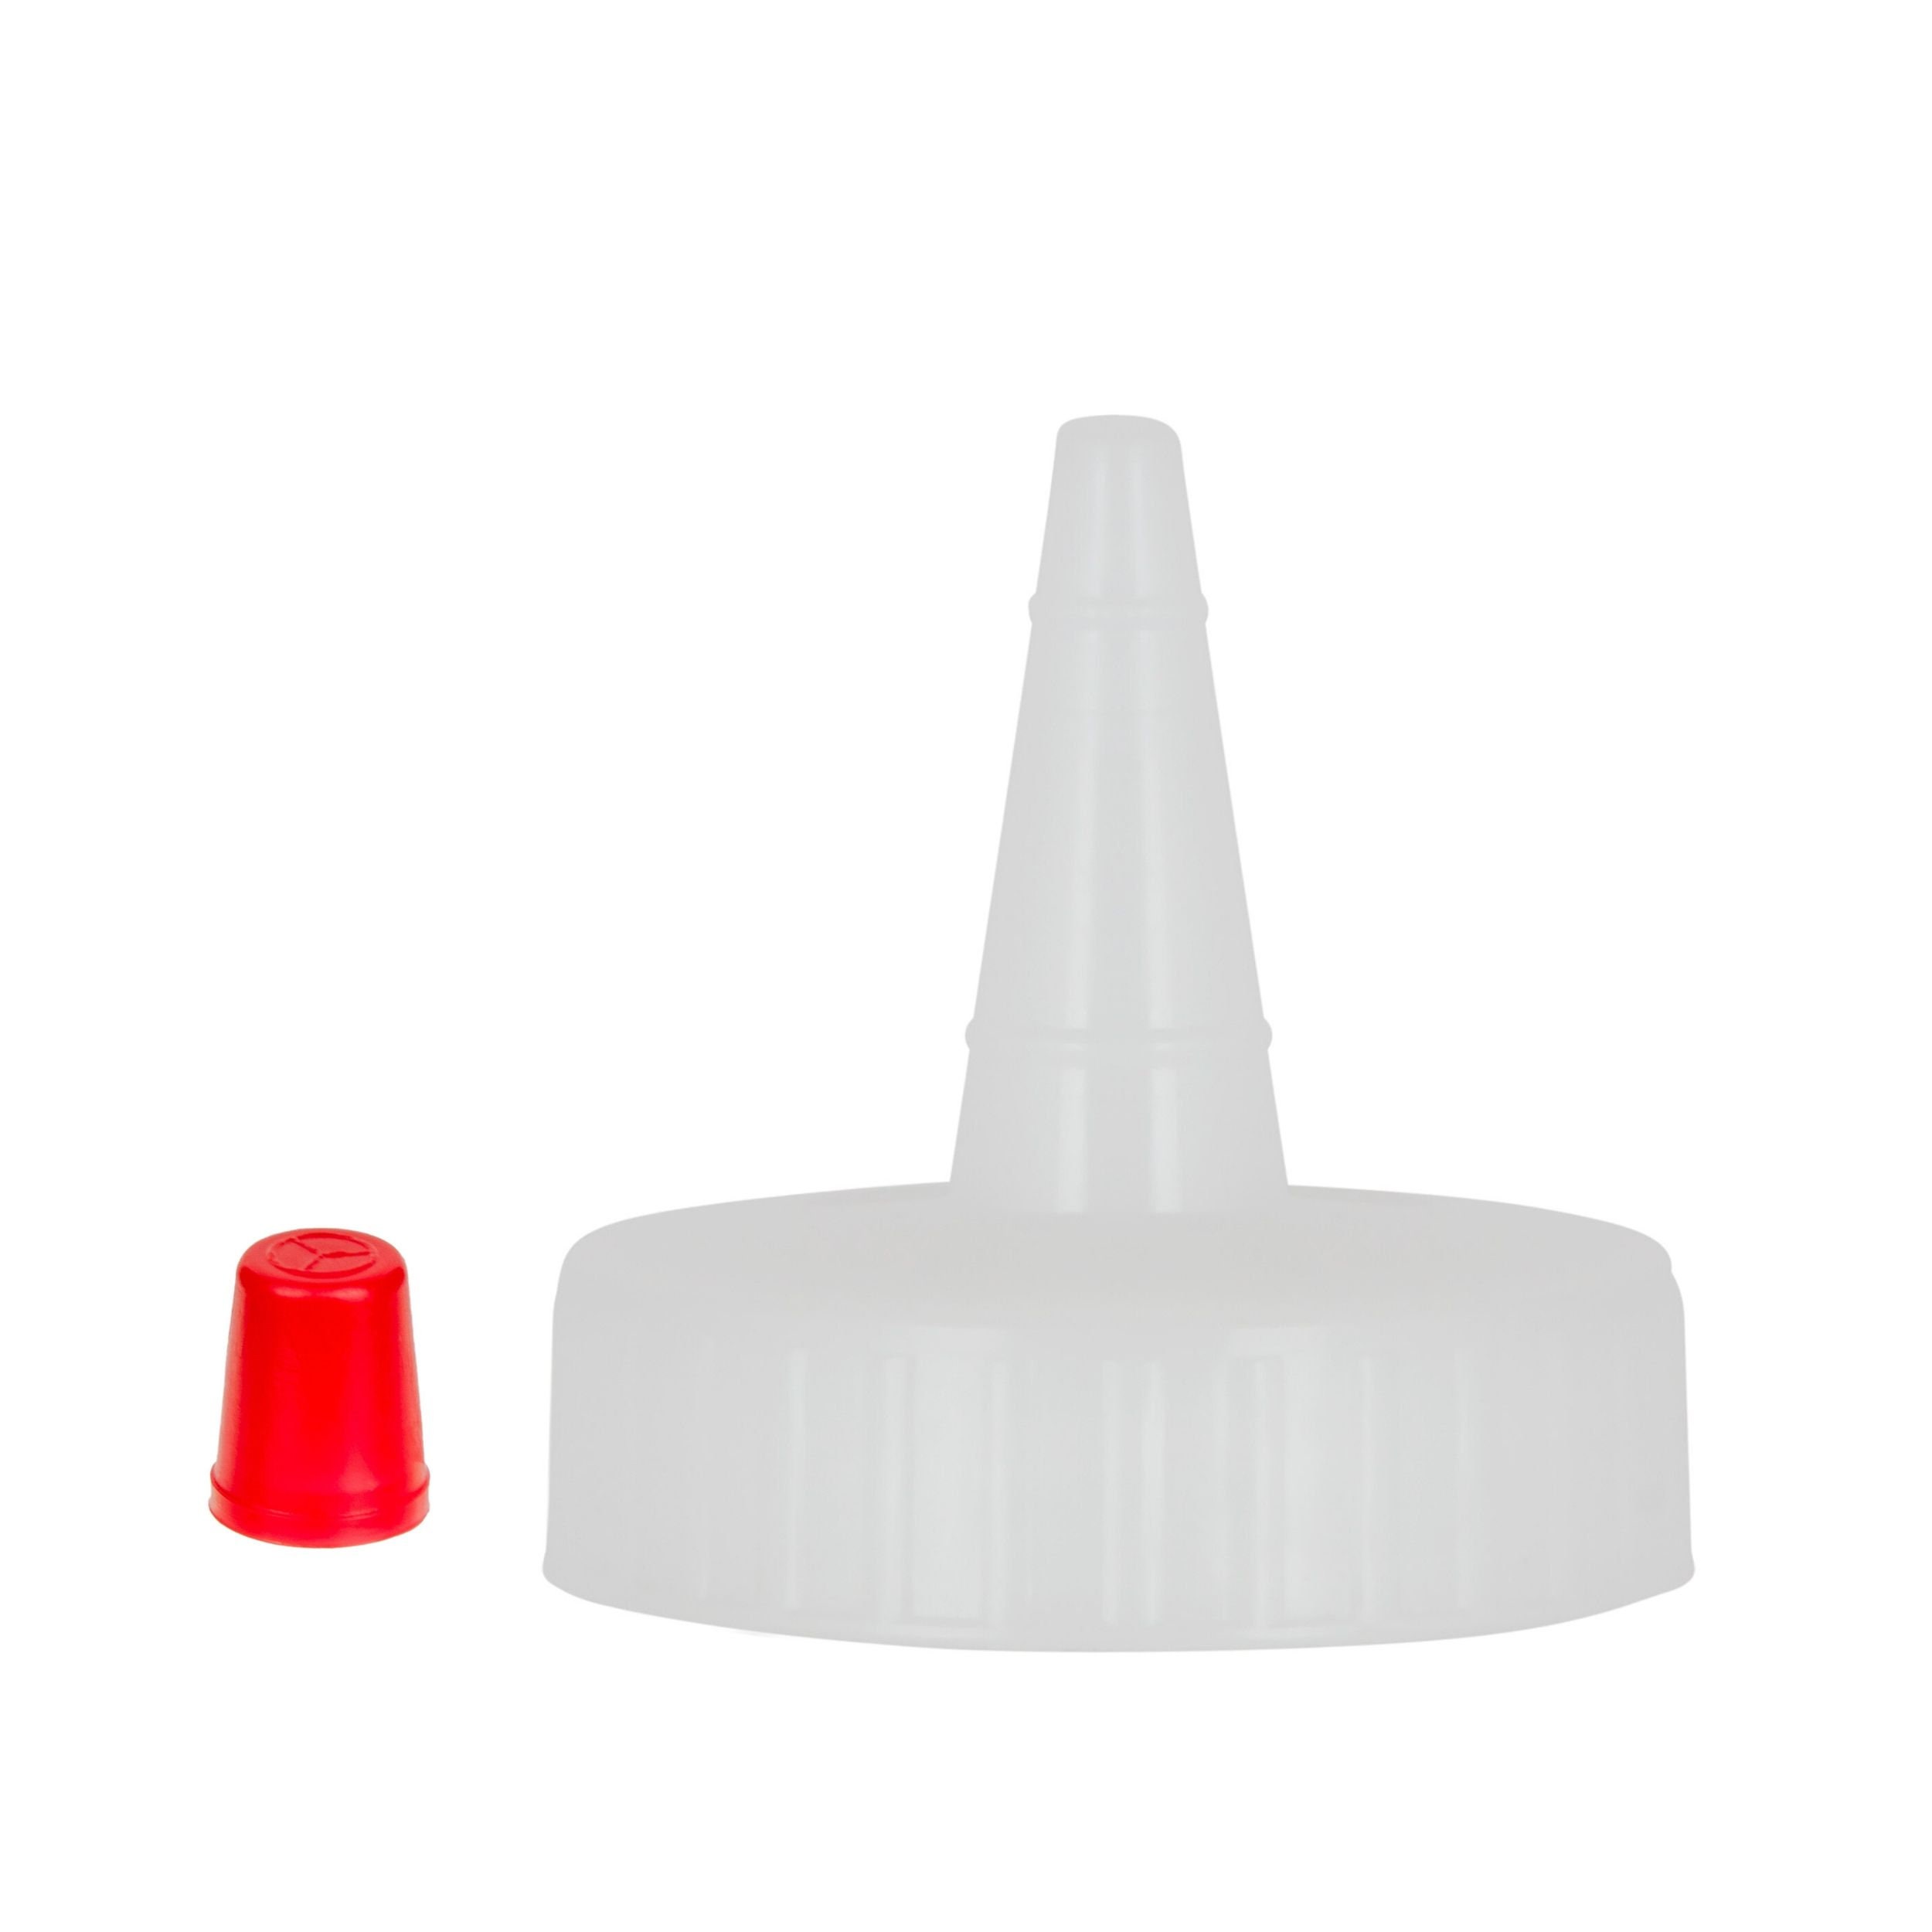 kelkaa 2oz HDPE Plastic Squeeze Bottles with Red Yorker Caps (Pack of